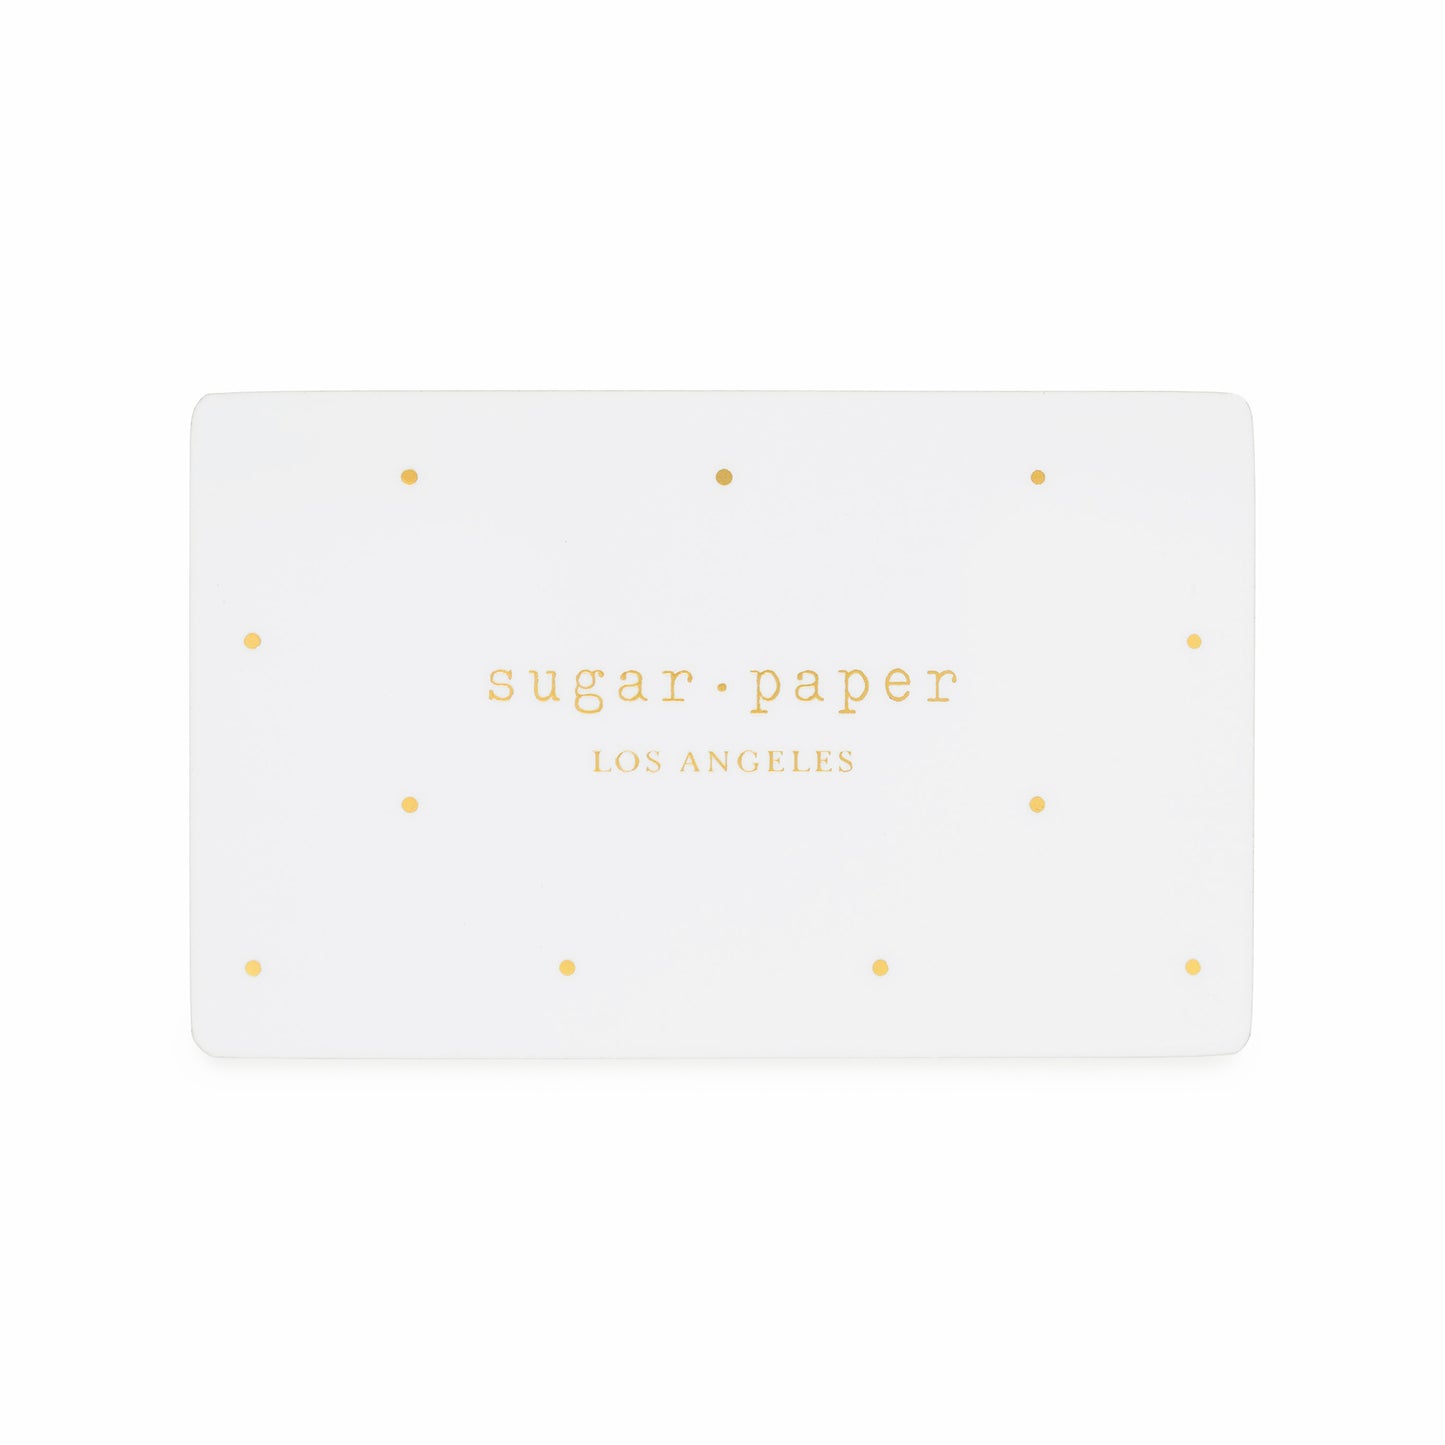 White with gold polka dots gift card